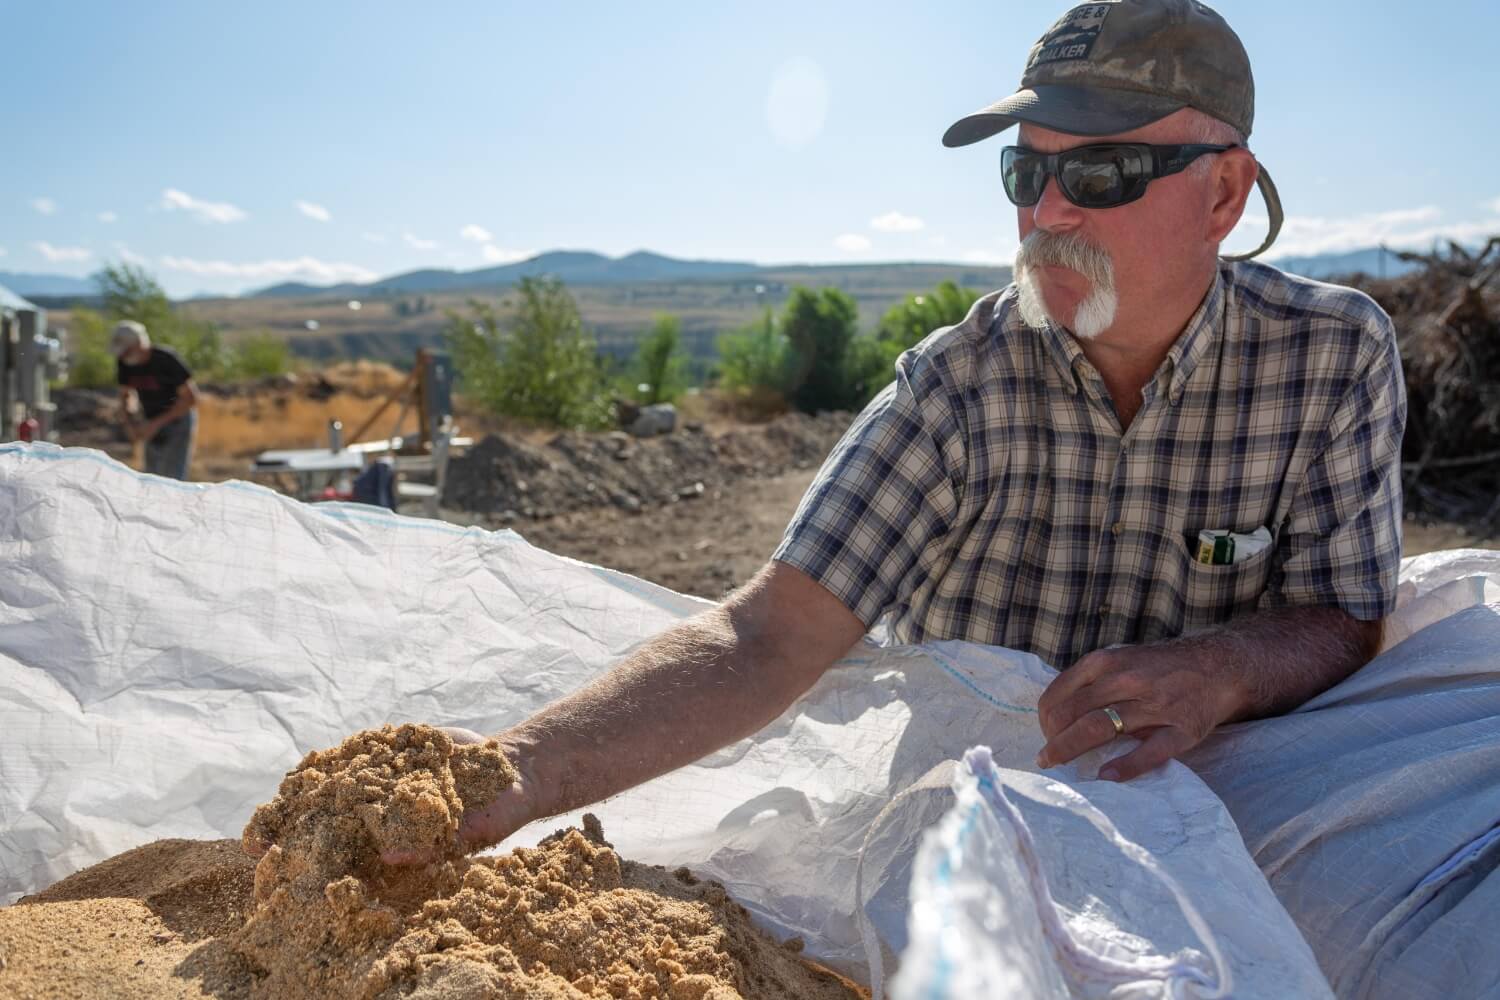 A person picks up a handful of sawmill dust and examines it.